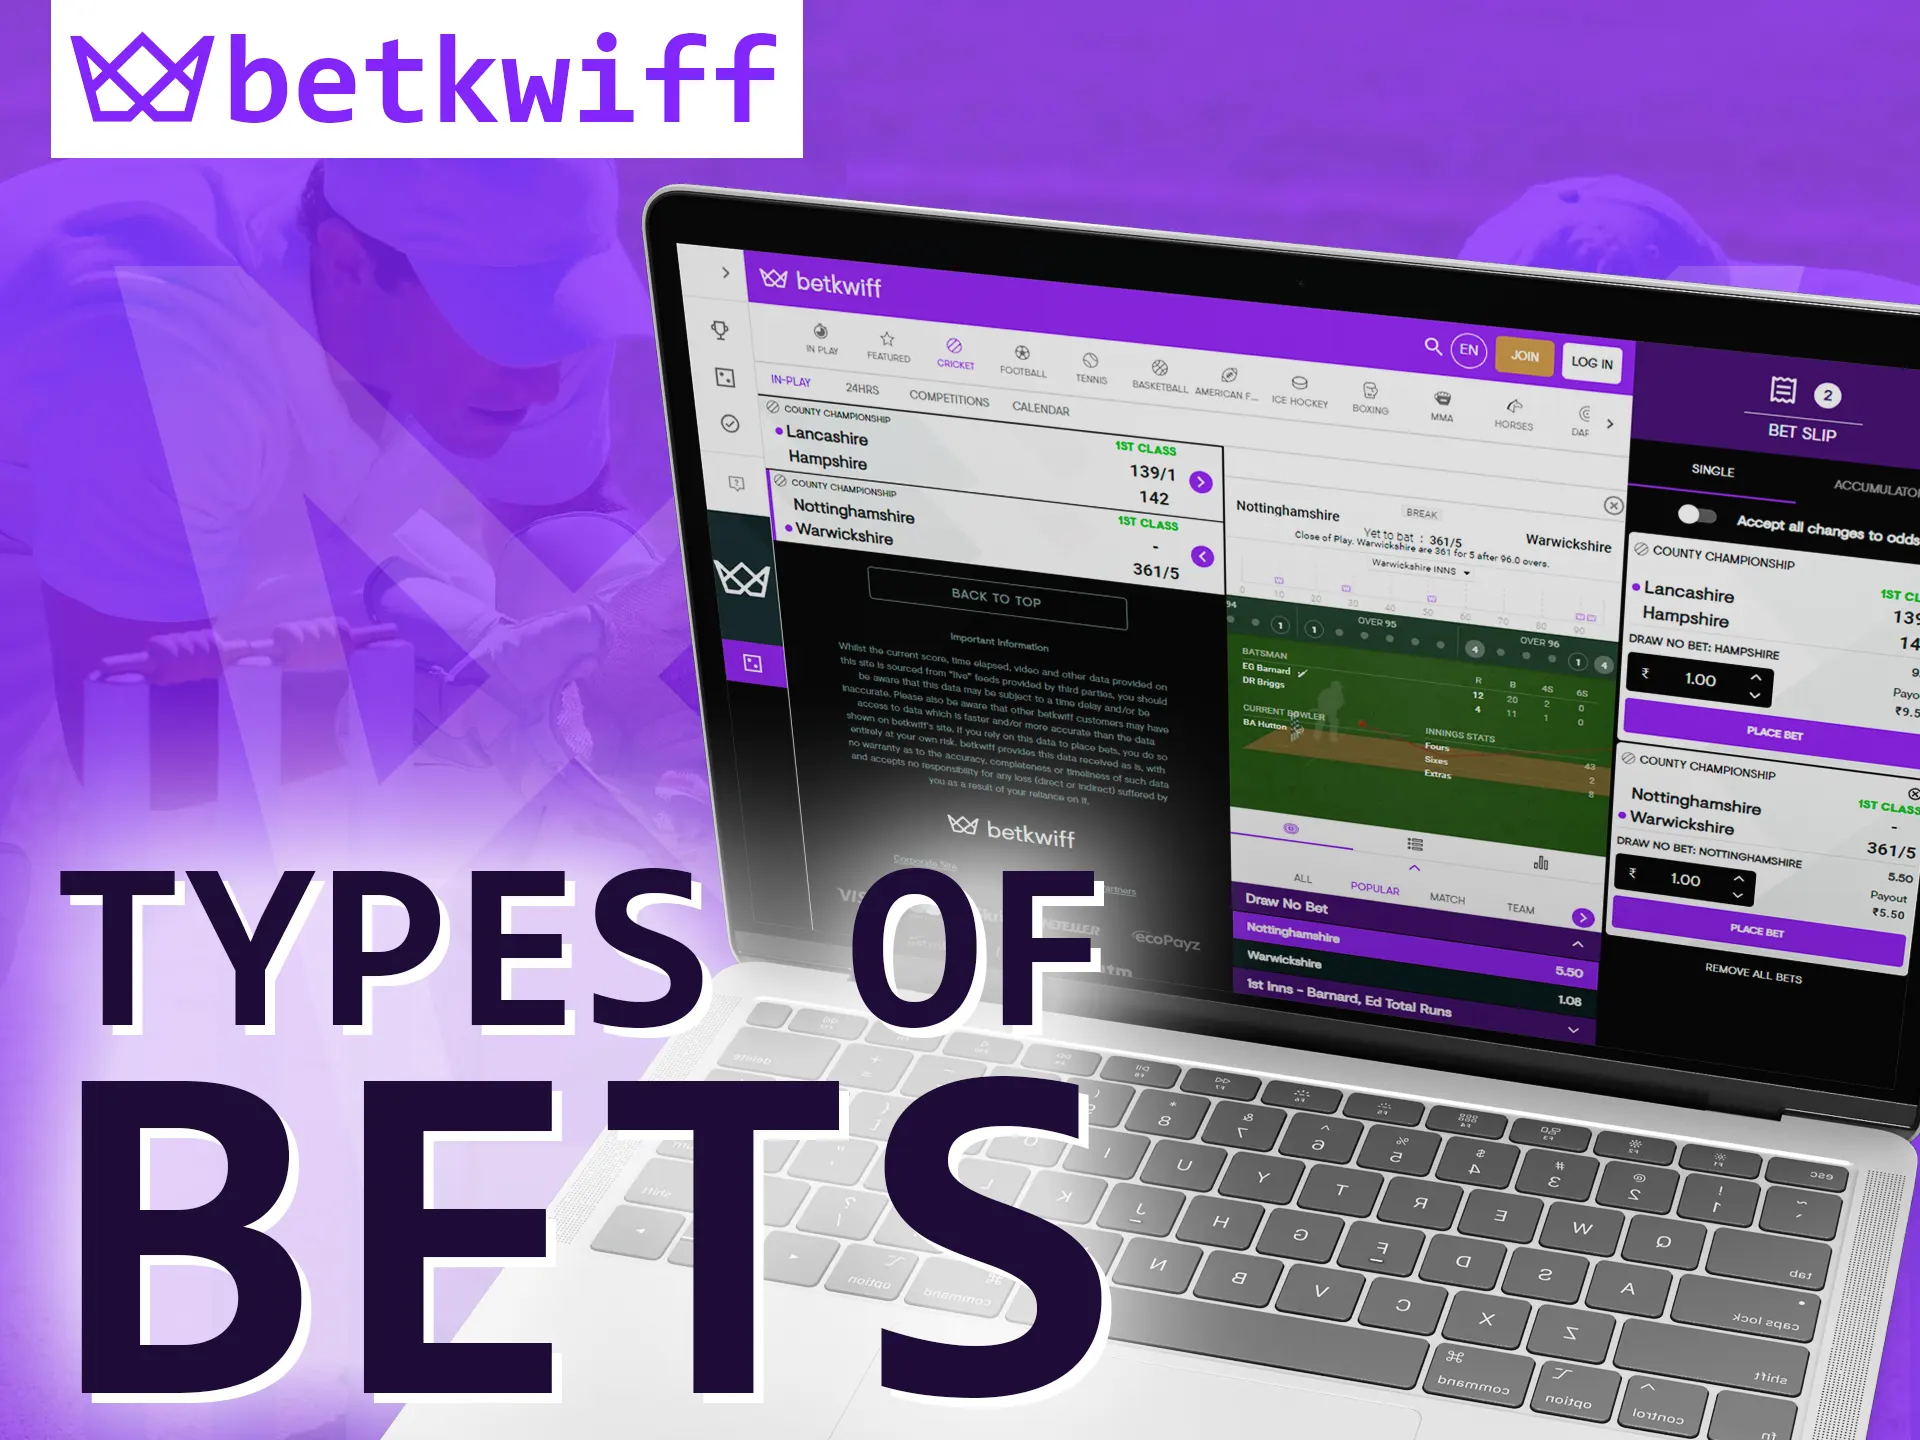 Try different types of bets at Betkwiff.